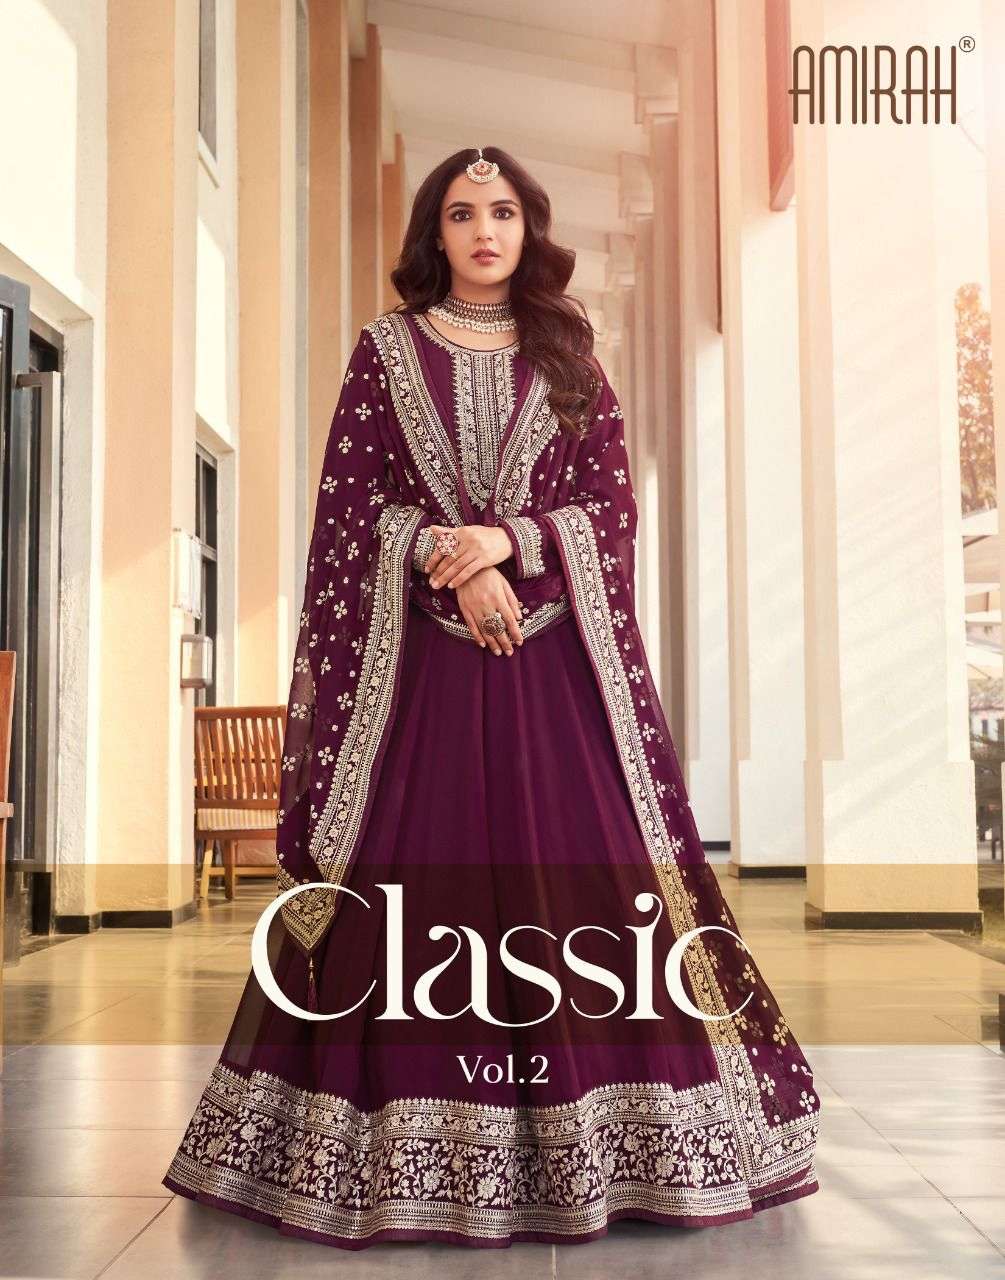 CLASSIC VOL 2 REAL JORJET HEAVY EMBBRODERY WORK LONG ANARKALI KURTI WITH DULL SANTOON BOTTOM AND DUP...